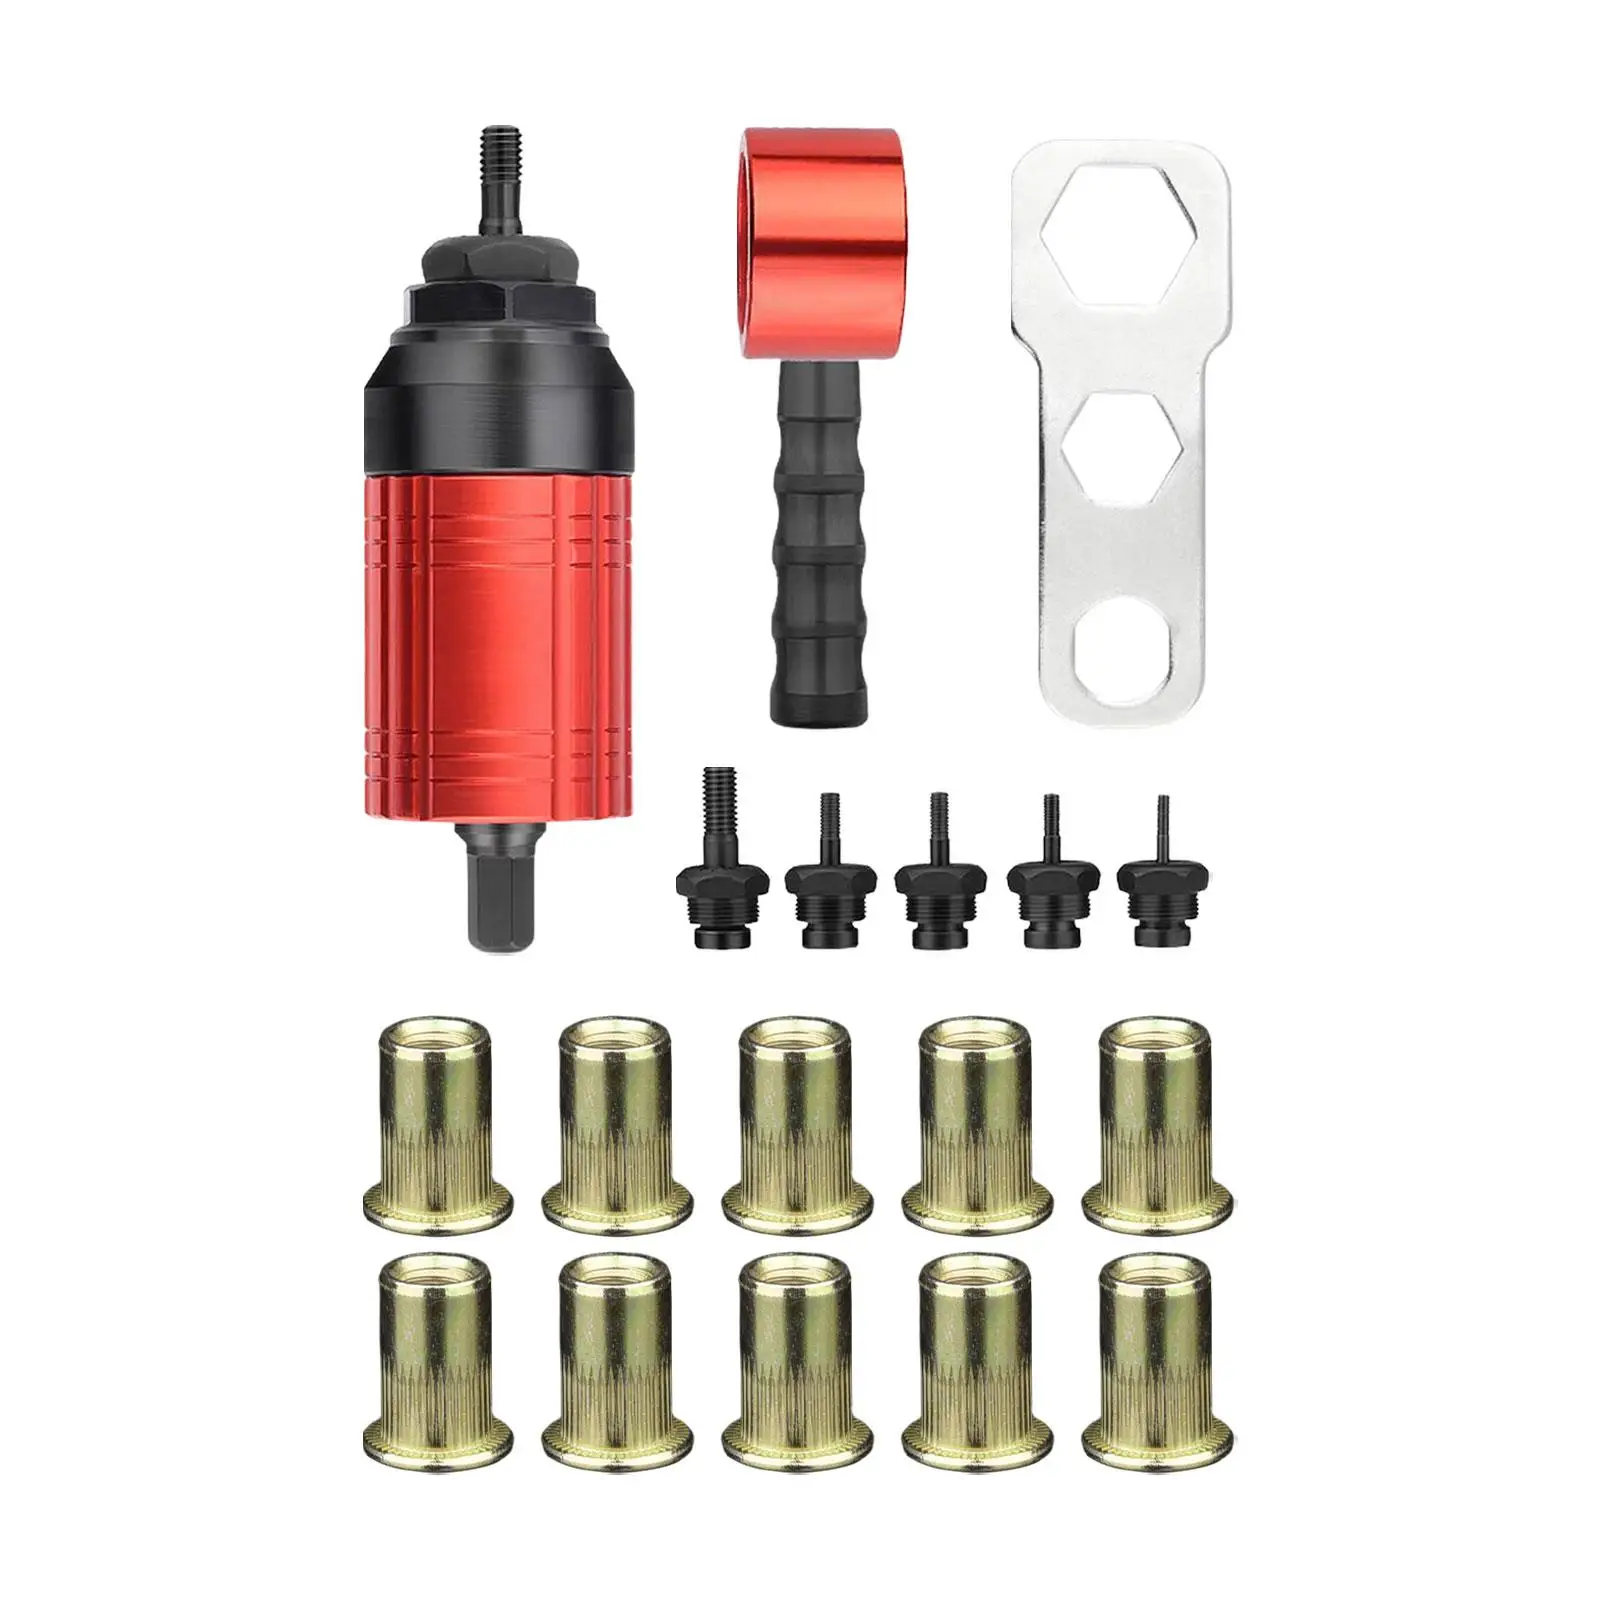 Rivet Nut Drill Adaptor Attachment Heavy Duty Professional Riveting Tools for Ship Furniture Architecture Electrical Appliance